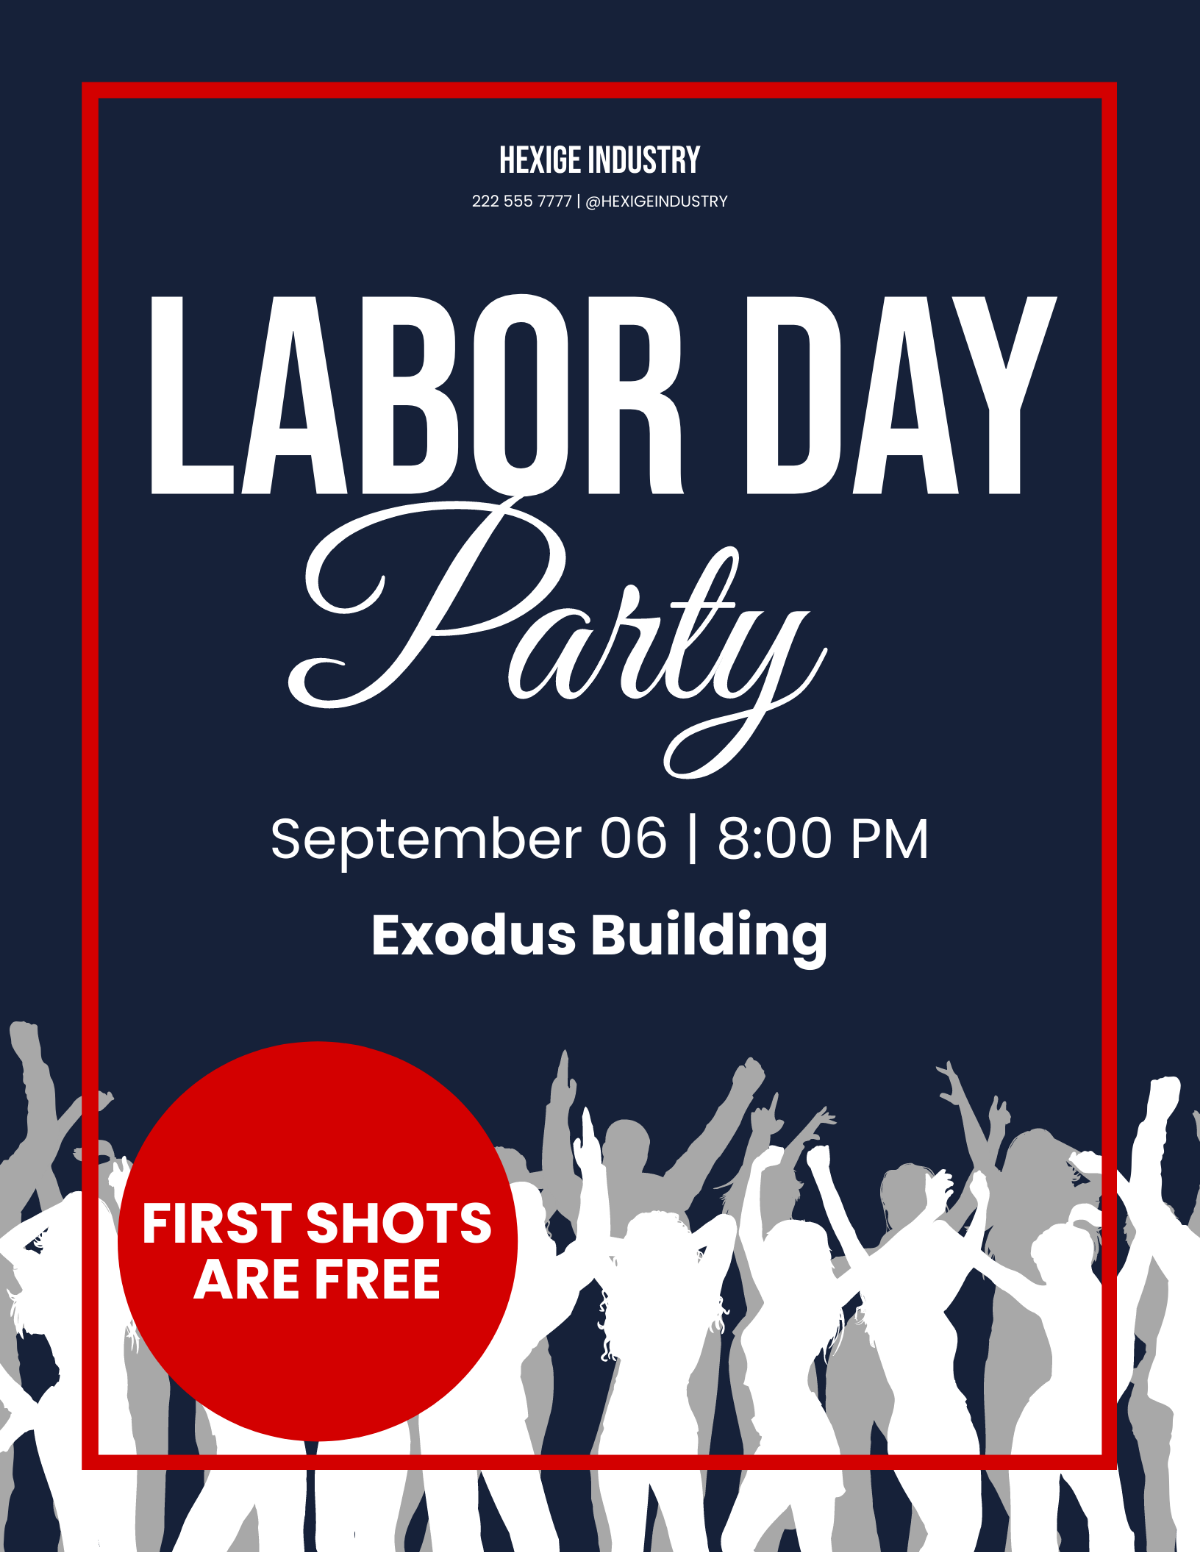 Party Labor Day Flyer Template